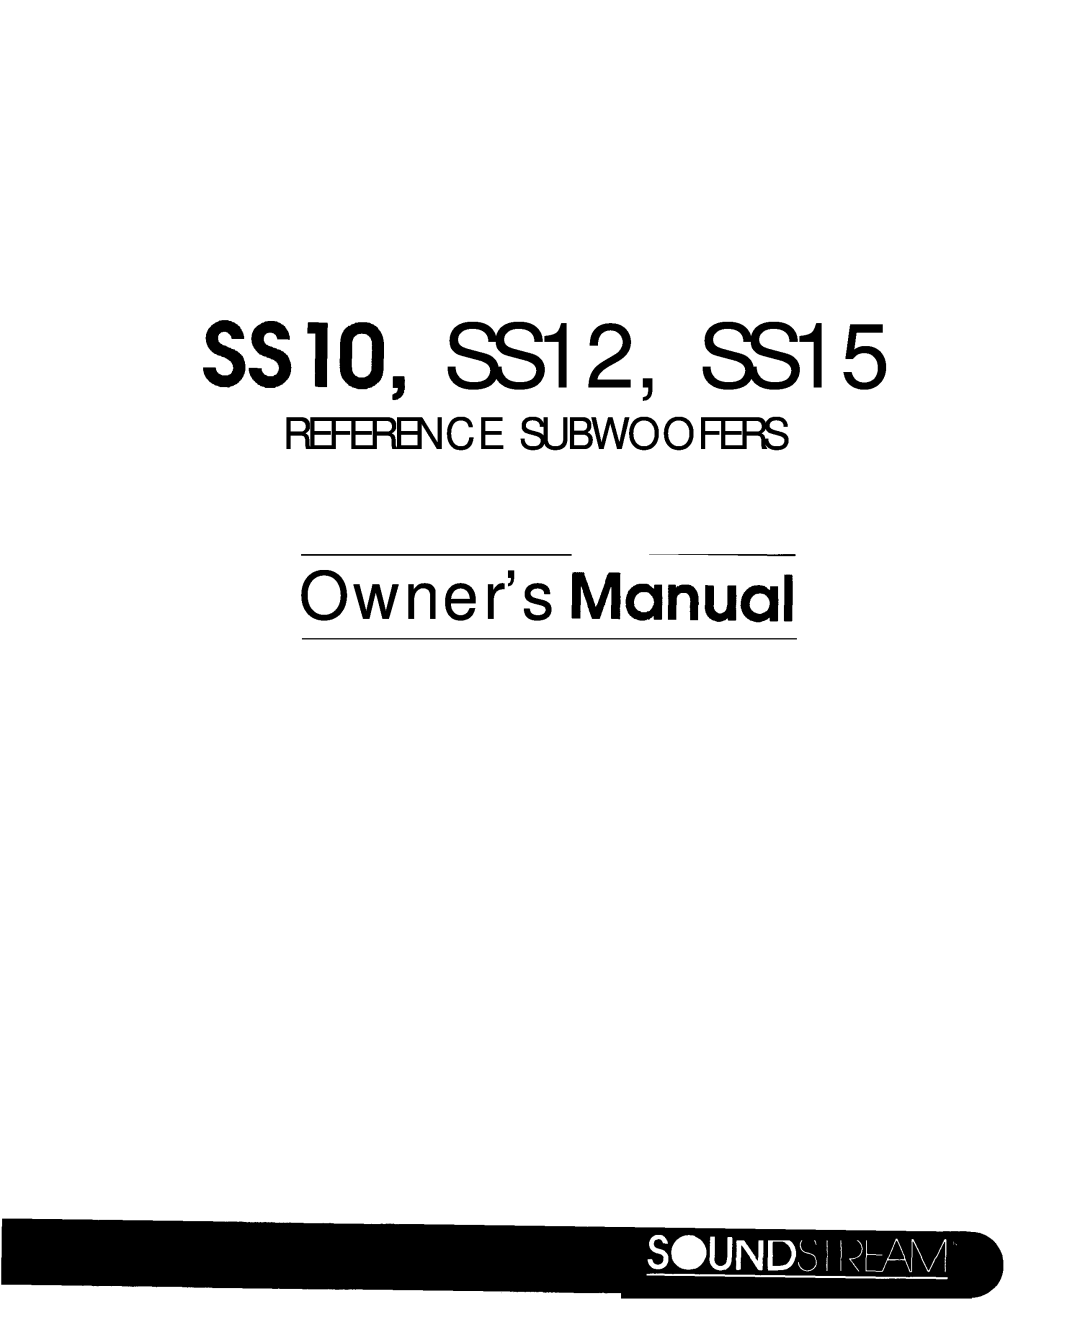 Soundstream Technologies owner manual SSIO, SS12, SS15, Reference Subwoofers 